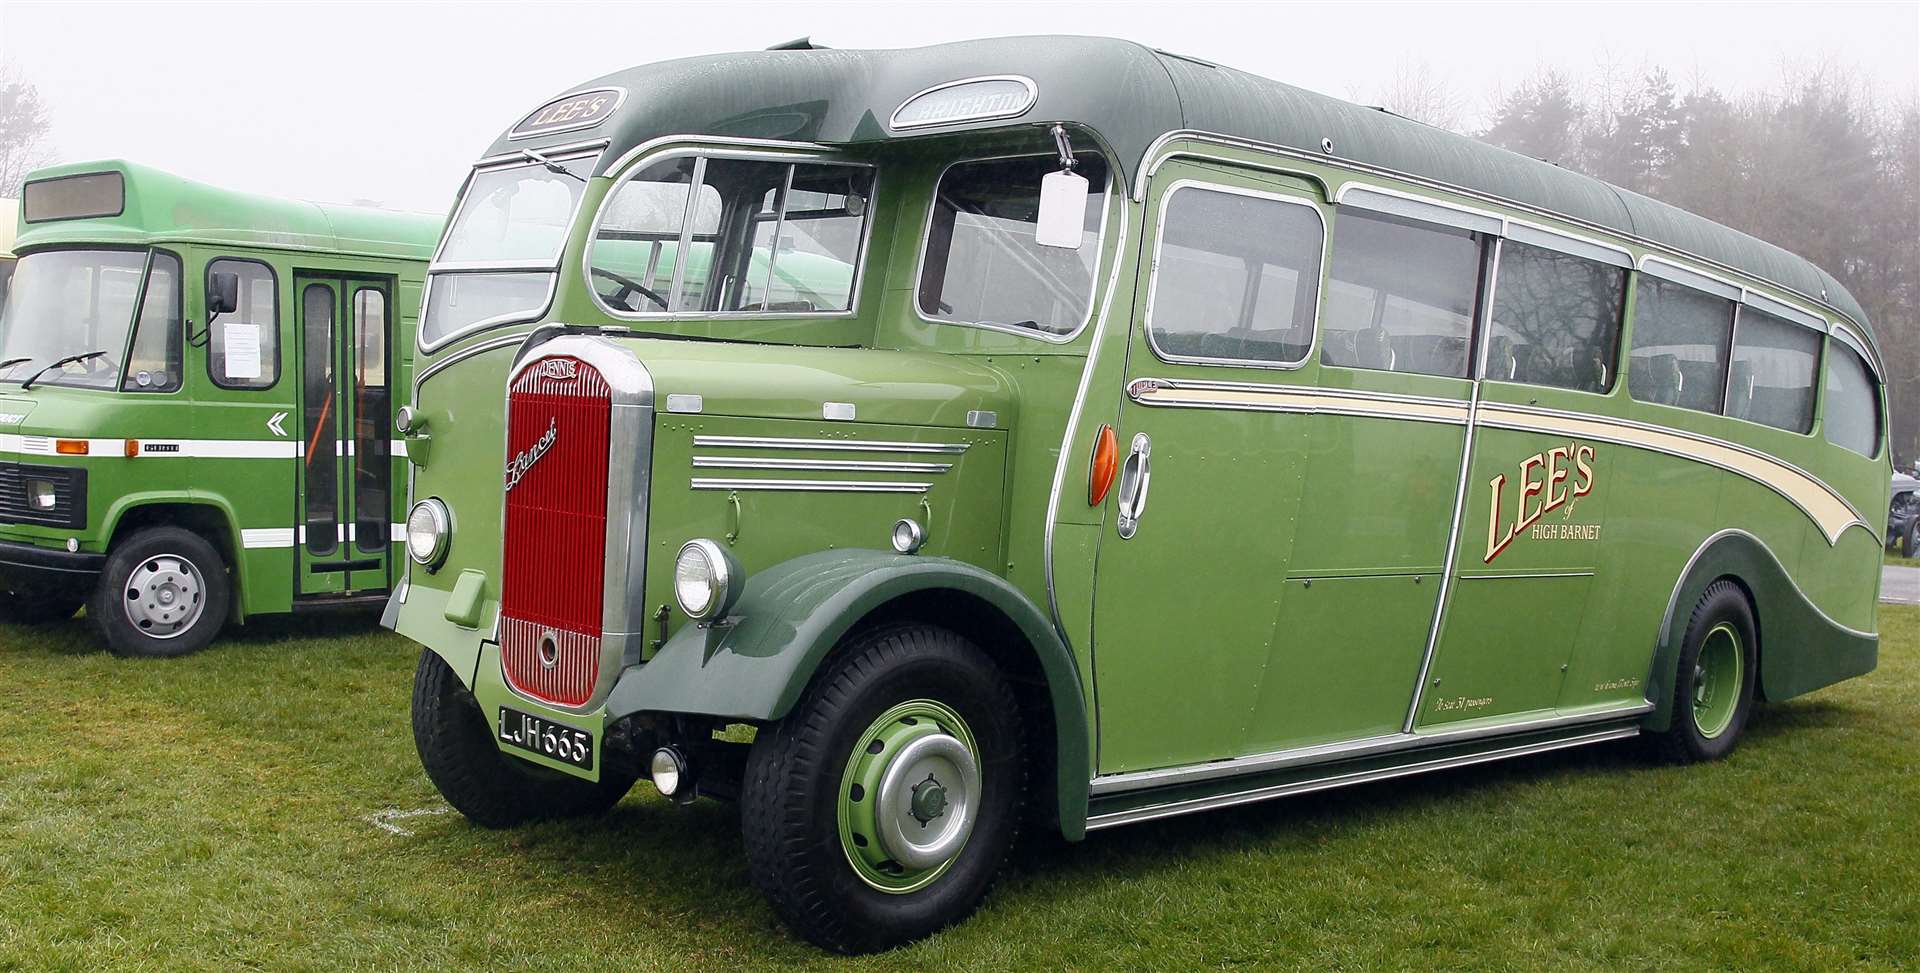 The Heritage Transport Show will be at Kent County Showground, Detling Picture: Sean Aidan